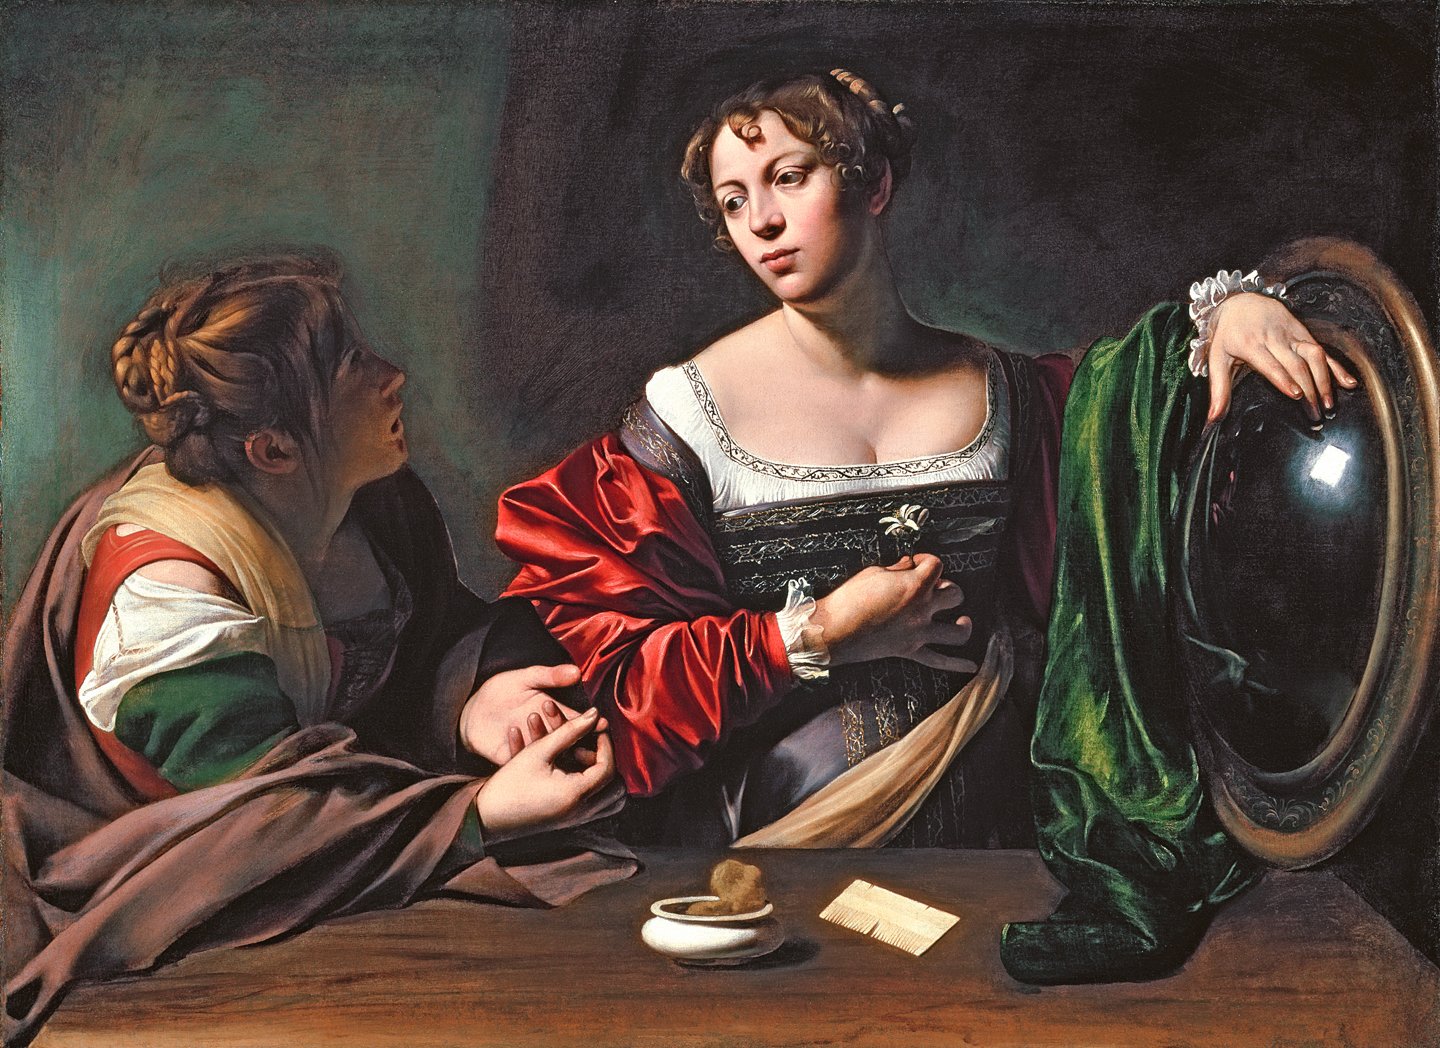 The painting depicts two women sitting at a table with a mirror in front of them. One woman is holding a small flower in her hand and the other is looking into the mirror. Both women are wearing elaborate clothing, with one wearing a red dress and the other wearing a green dress. The background is a dimly lit room with a window in the background.